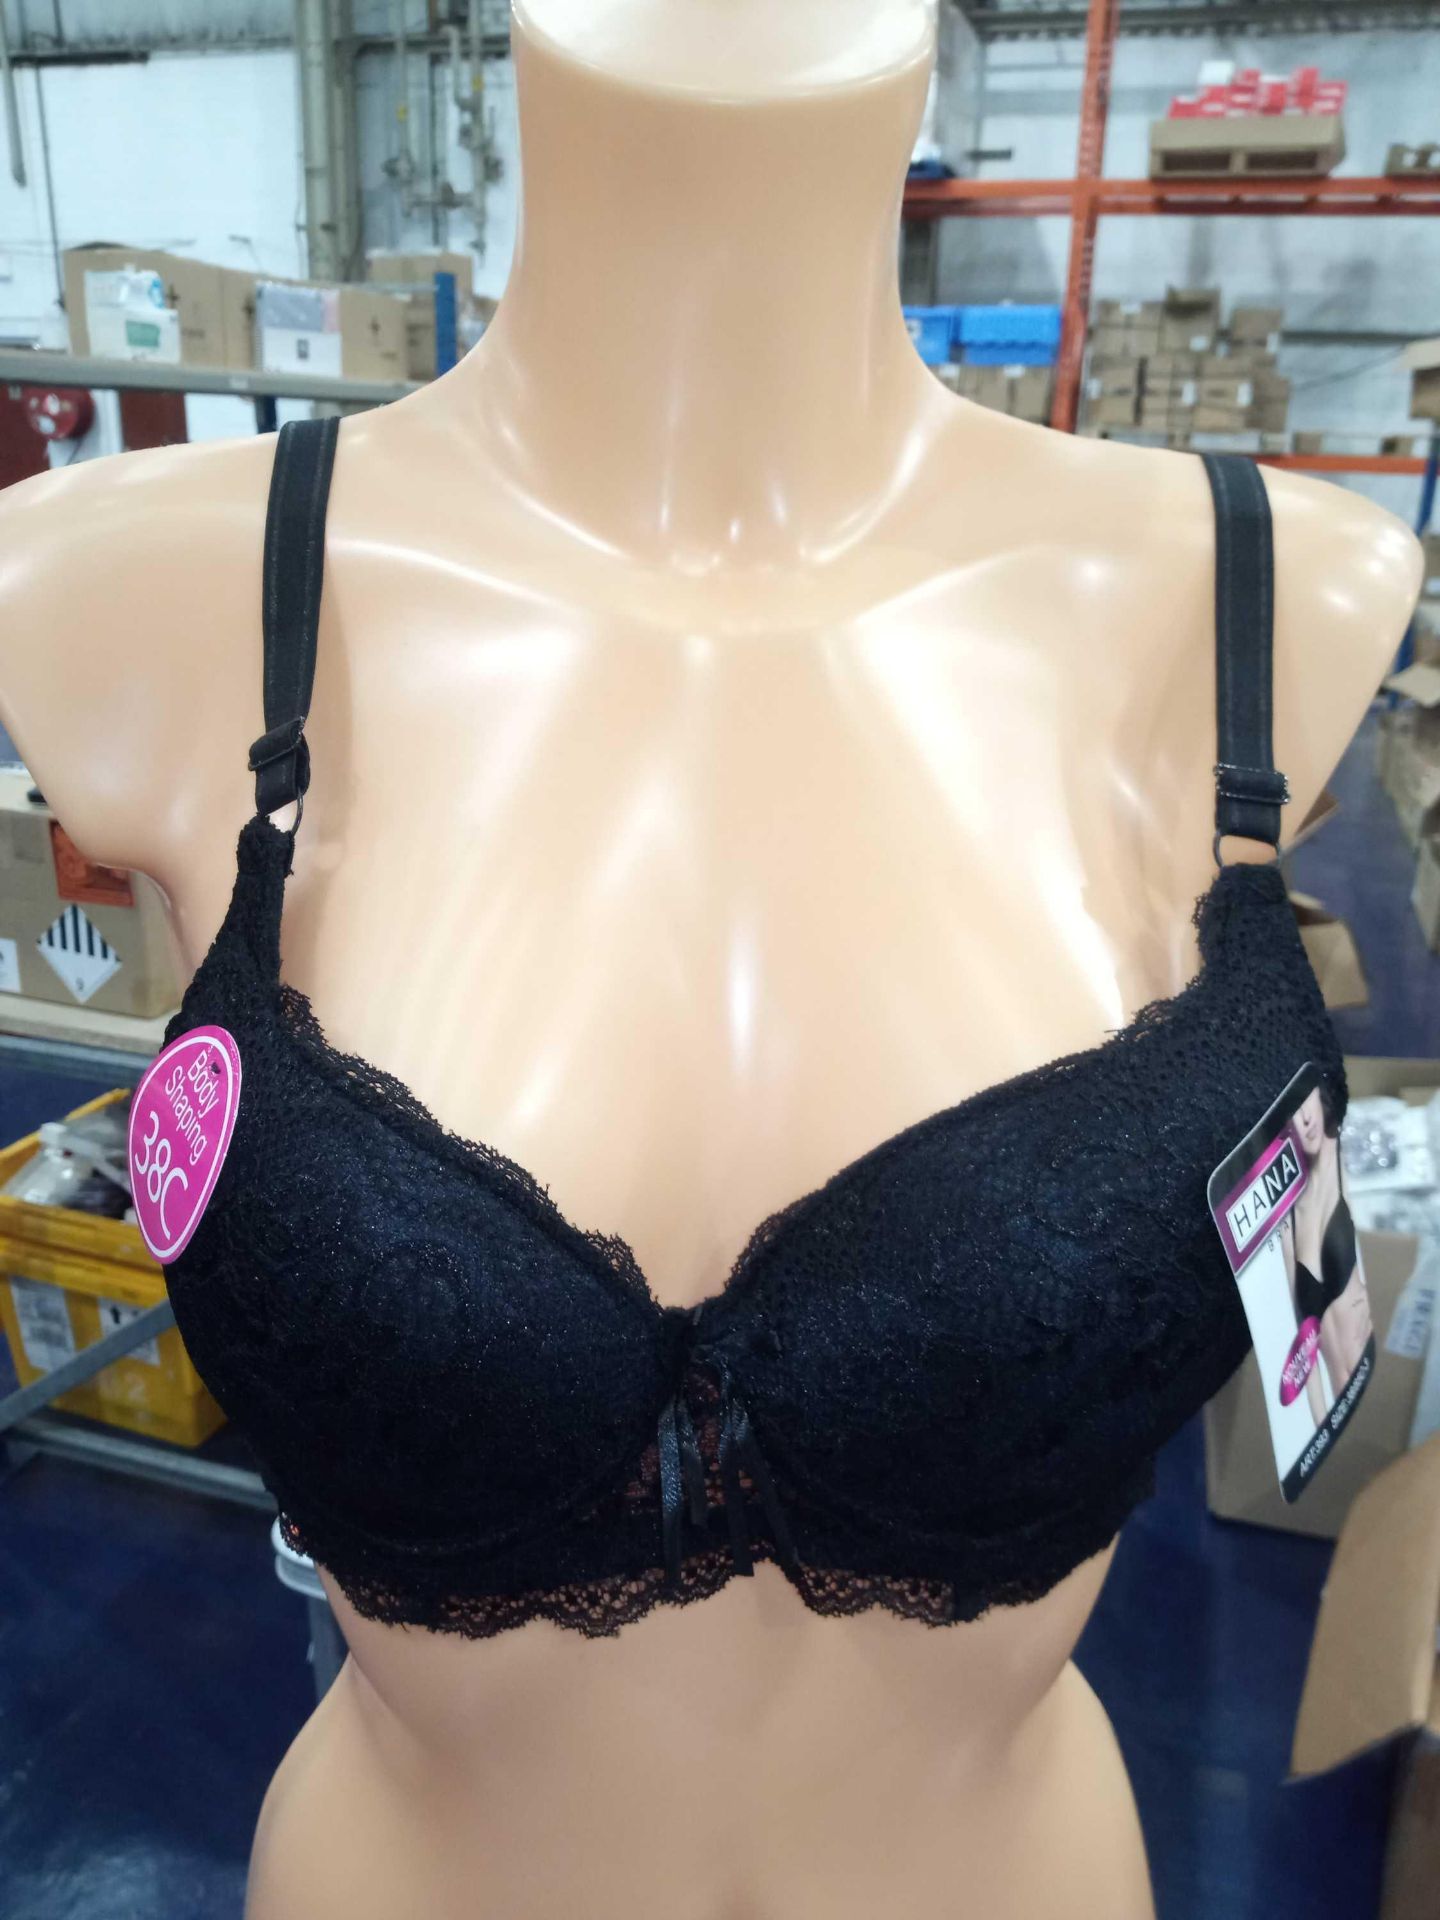 Lot To Contain At 3 Brand New Packs Of 6 Hana (393) Black Lace Ladies Bras Size 36B-46B Combined Rrp